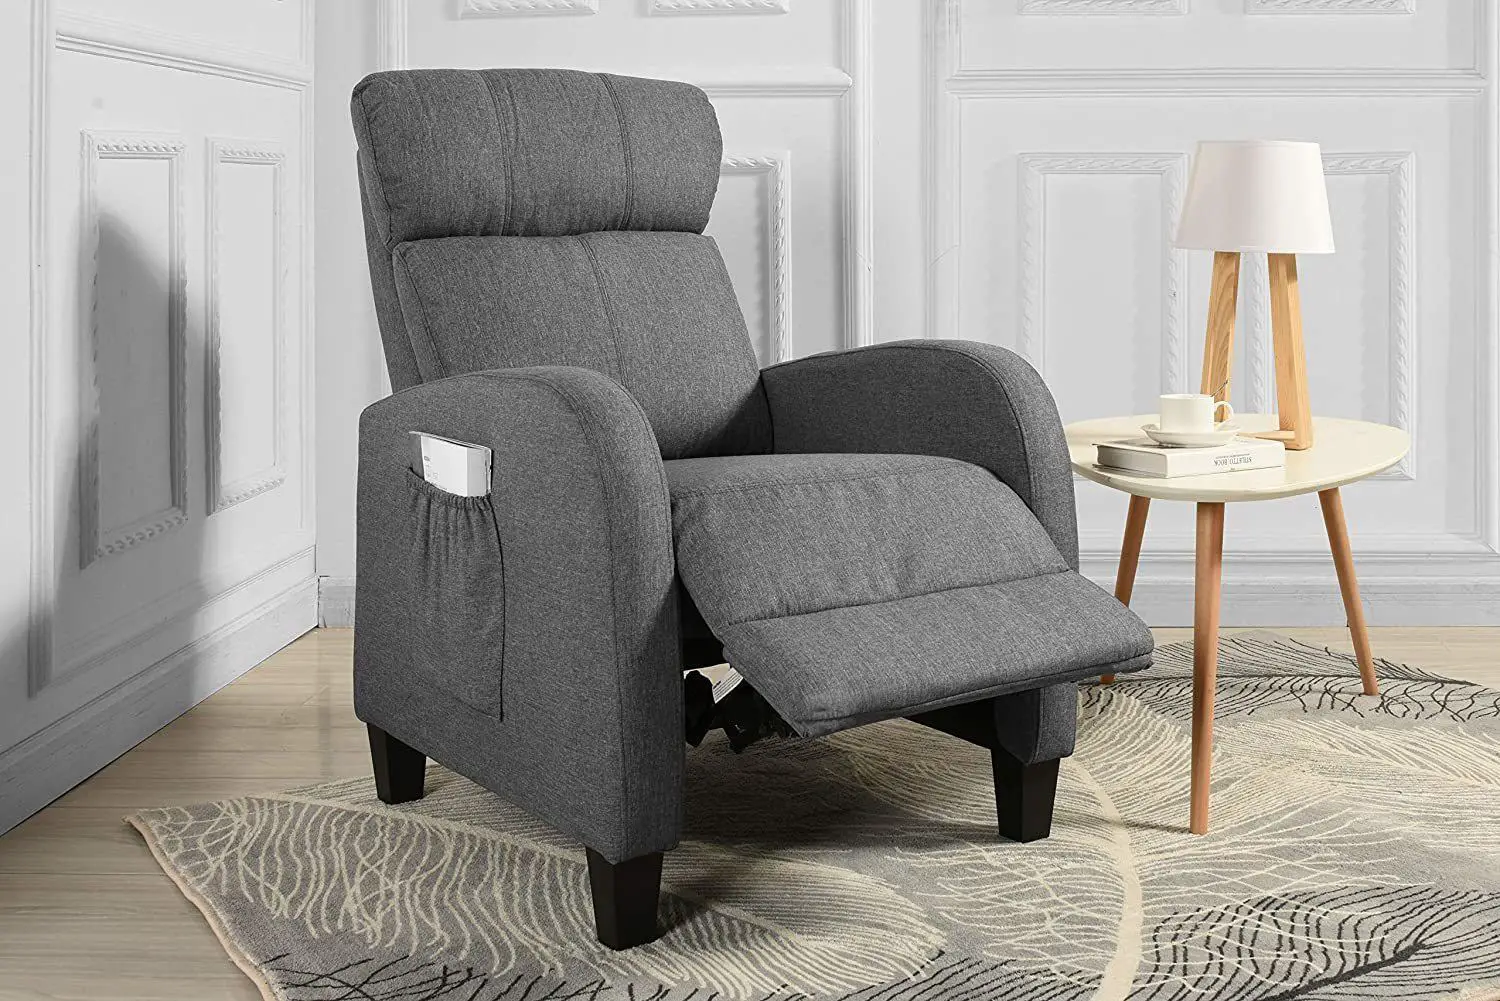 Best Living Room Chairs For Bulging Discs